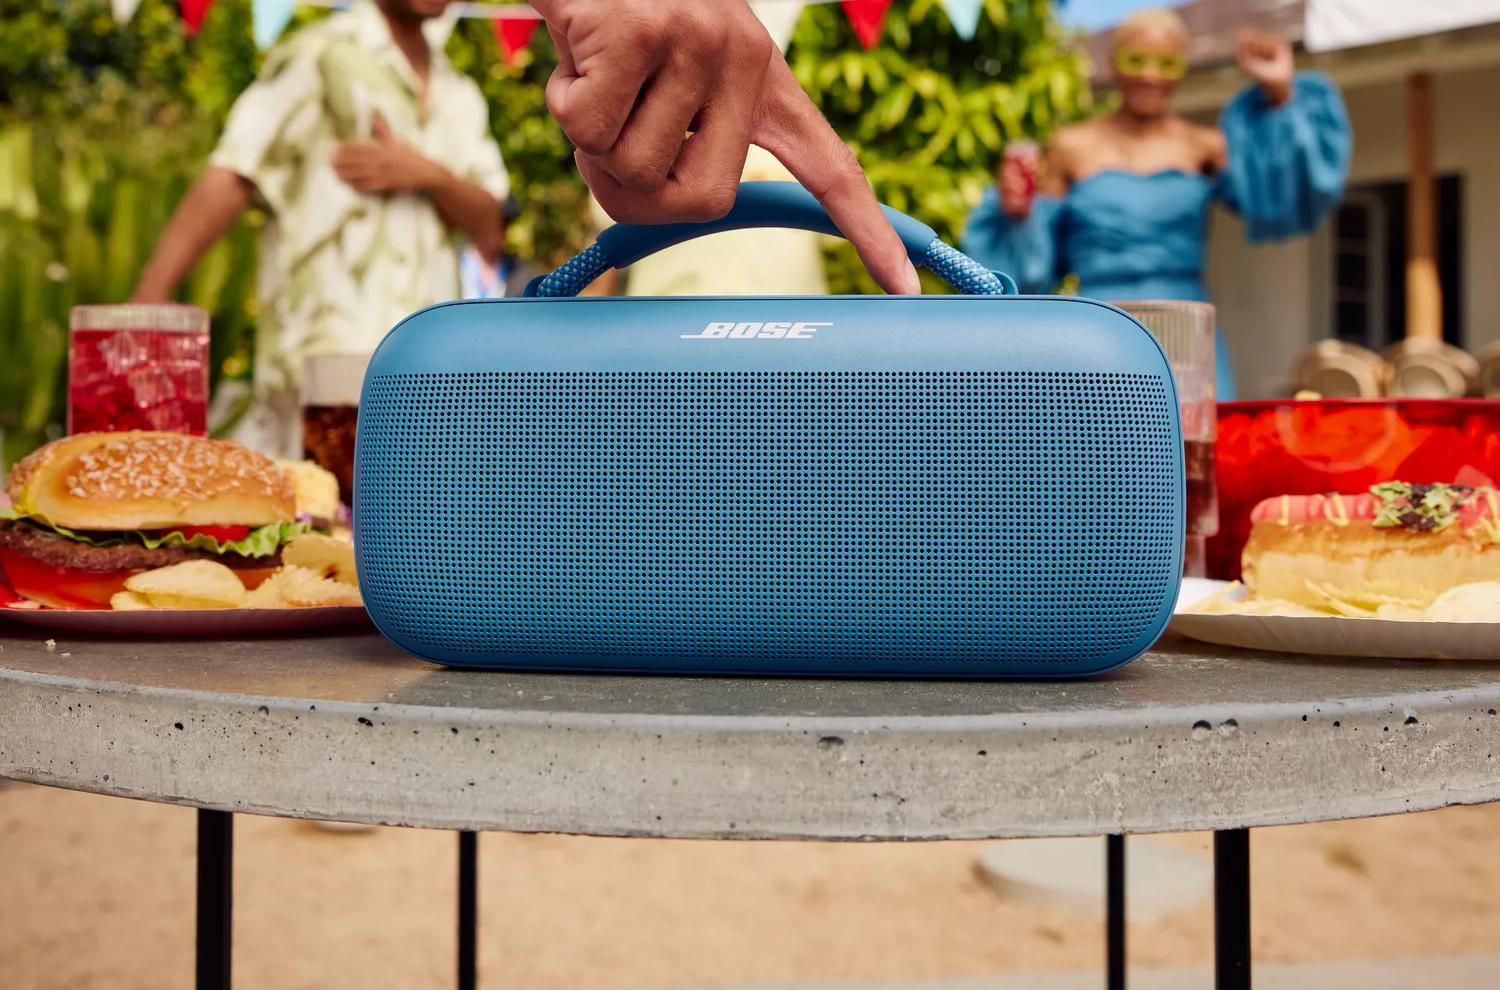 Person pressing ‘Play’ on a Bose SoundLink Max Portable Speaker at a backyard barbecue